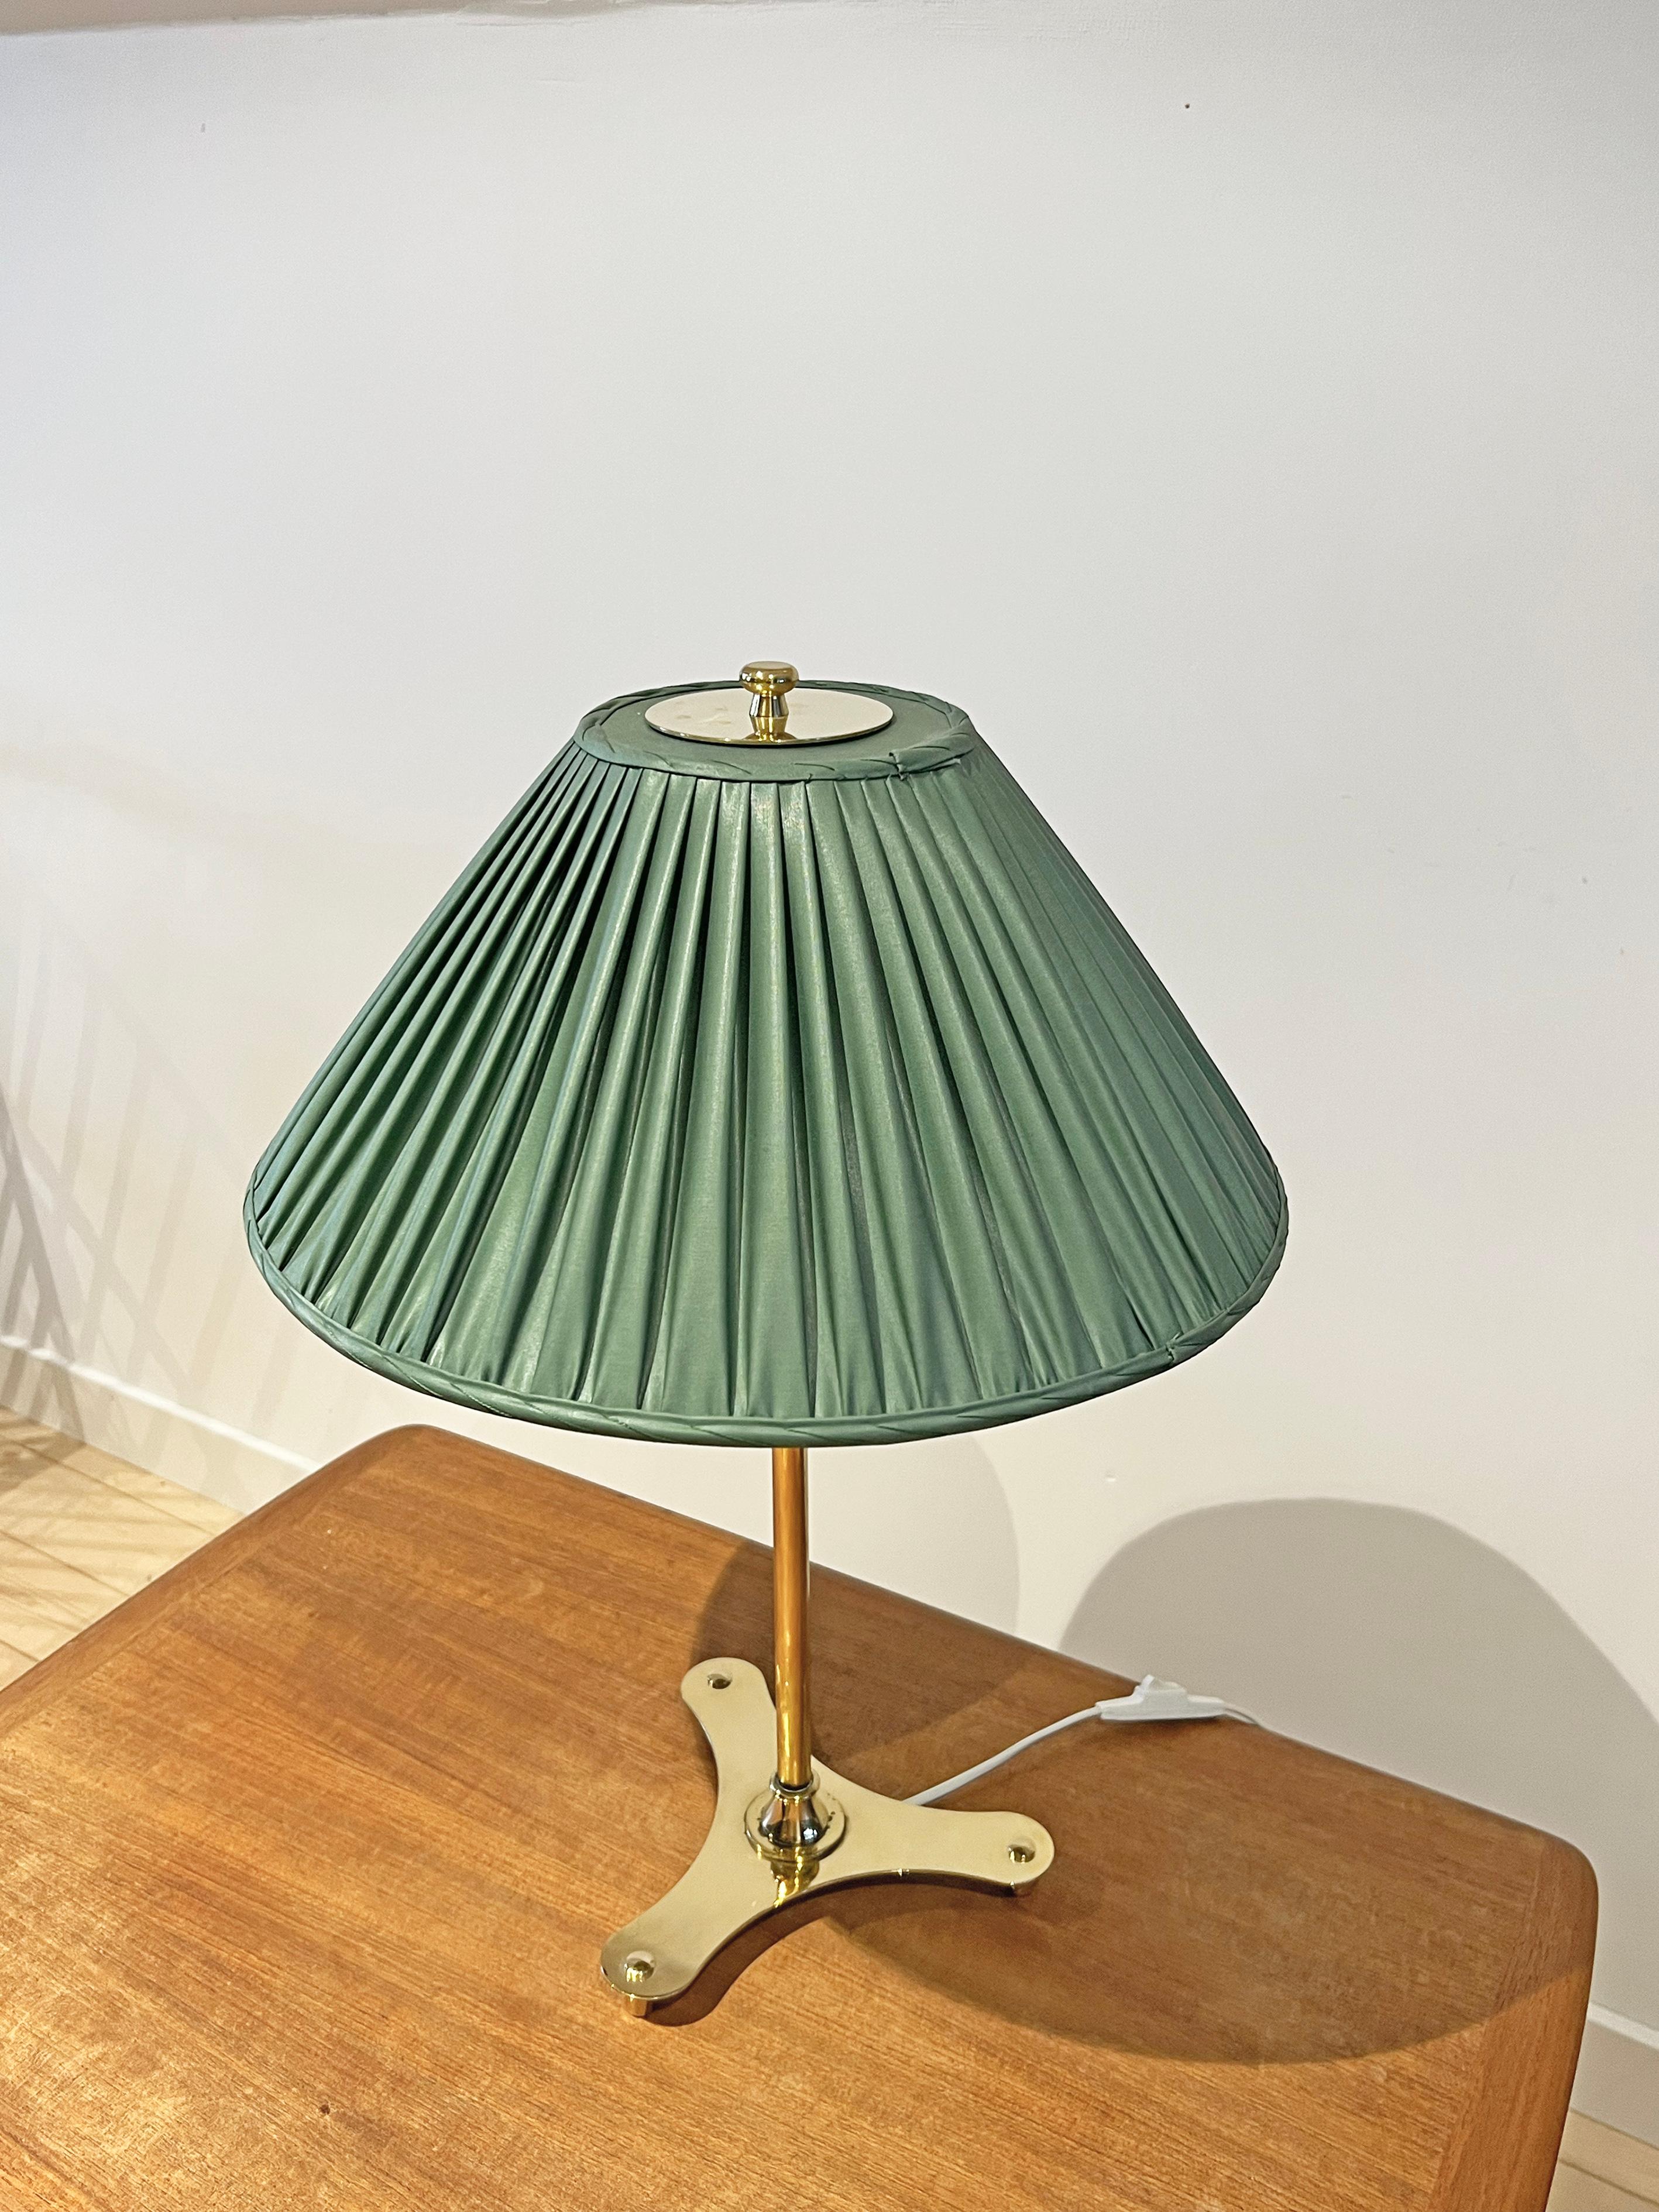 Table lamp model 2467/2 designed by Josef Frank for Firma Svenskt Tenn, Sweden, 1950s. Brass with fabric shade (the shade is most likely original). 
Signed with maker's mark. 
This model is featured in Svenskt Tenn's catalog from the 1950's as